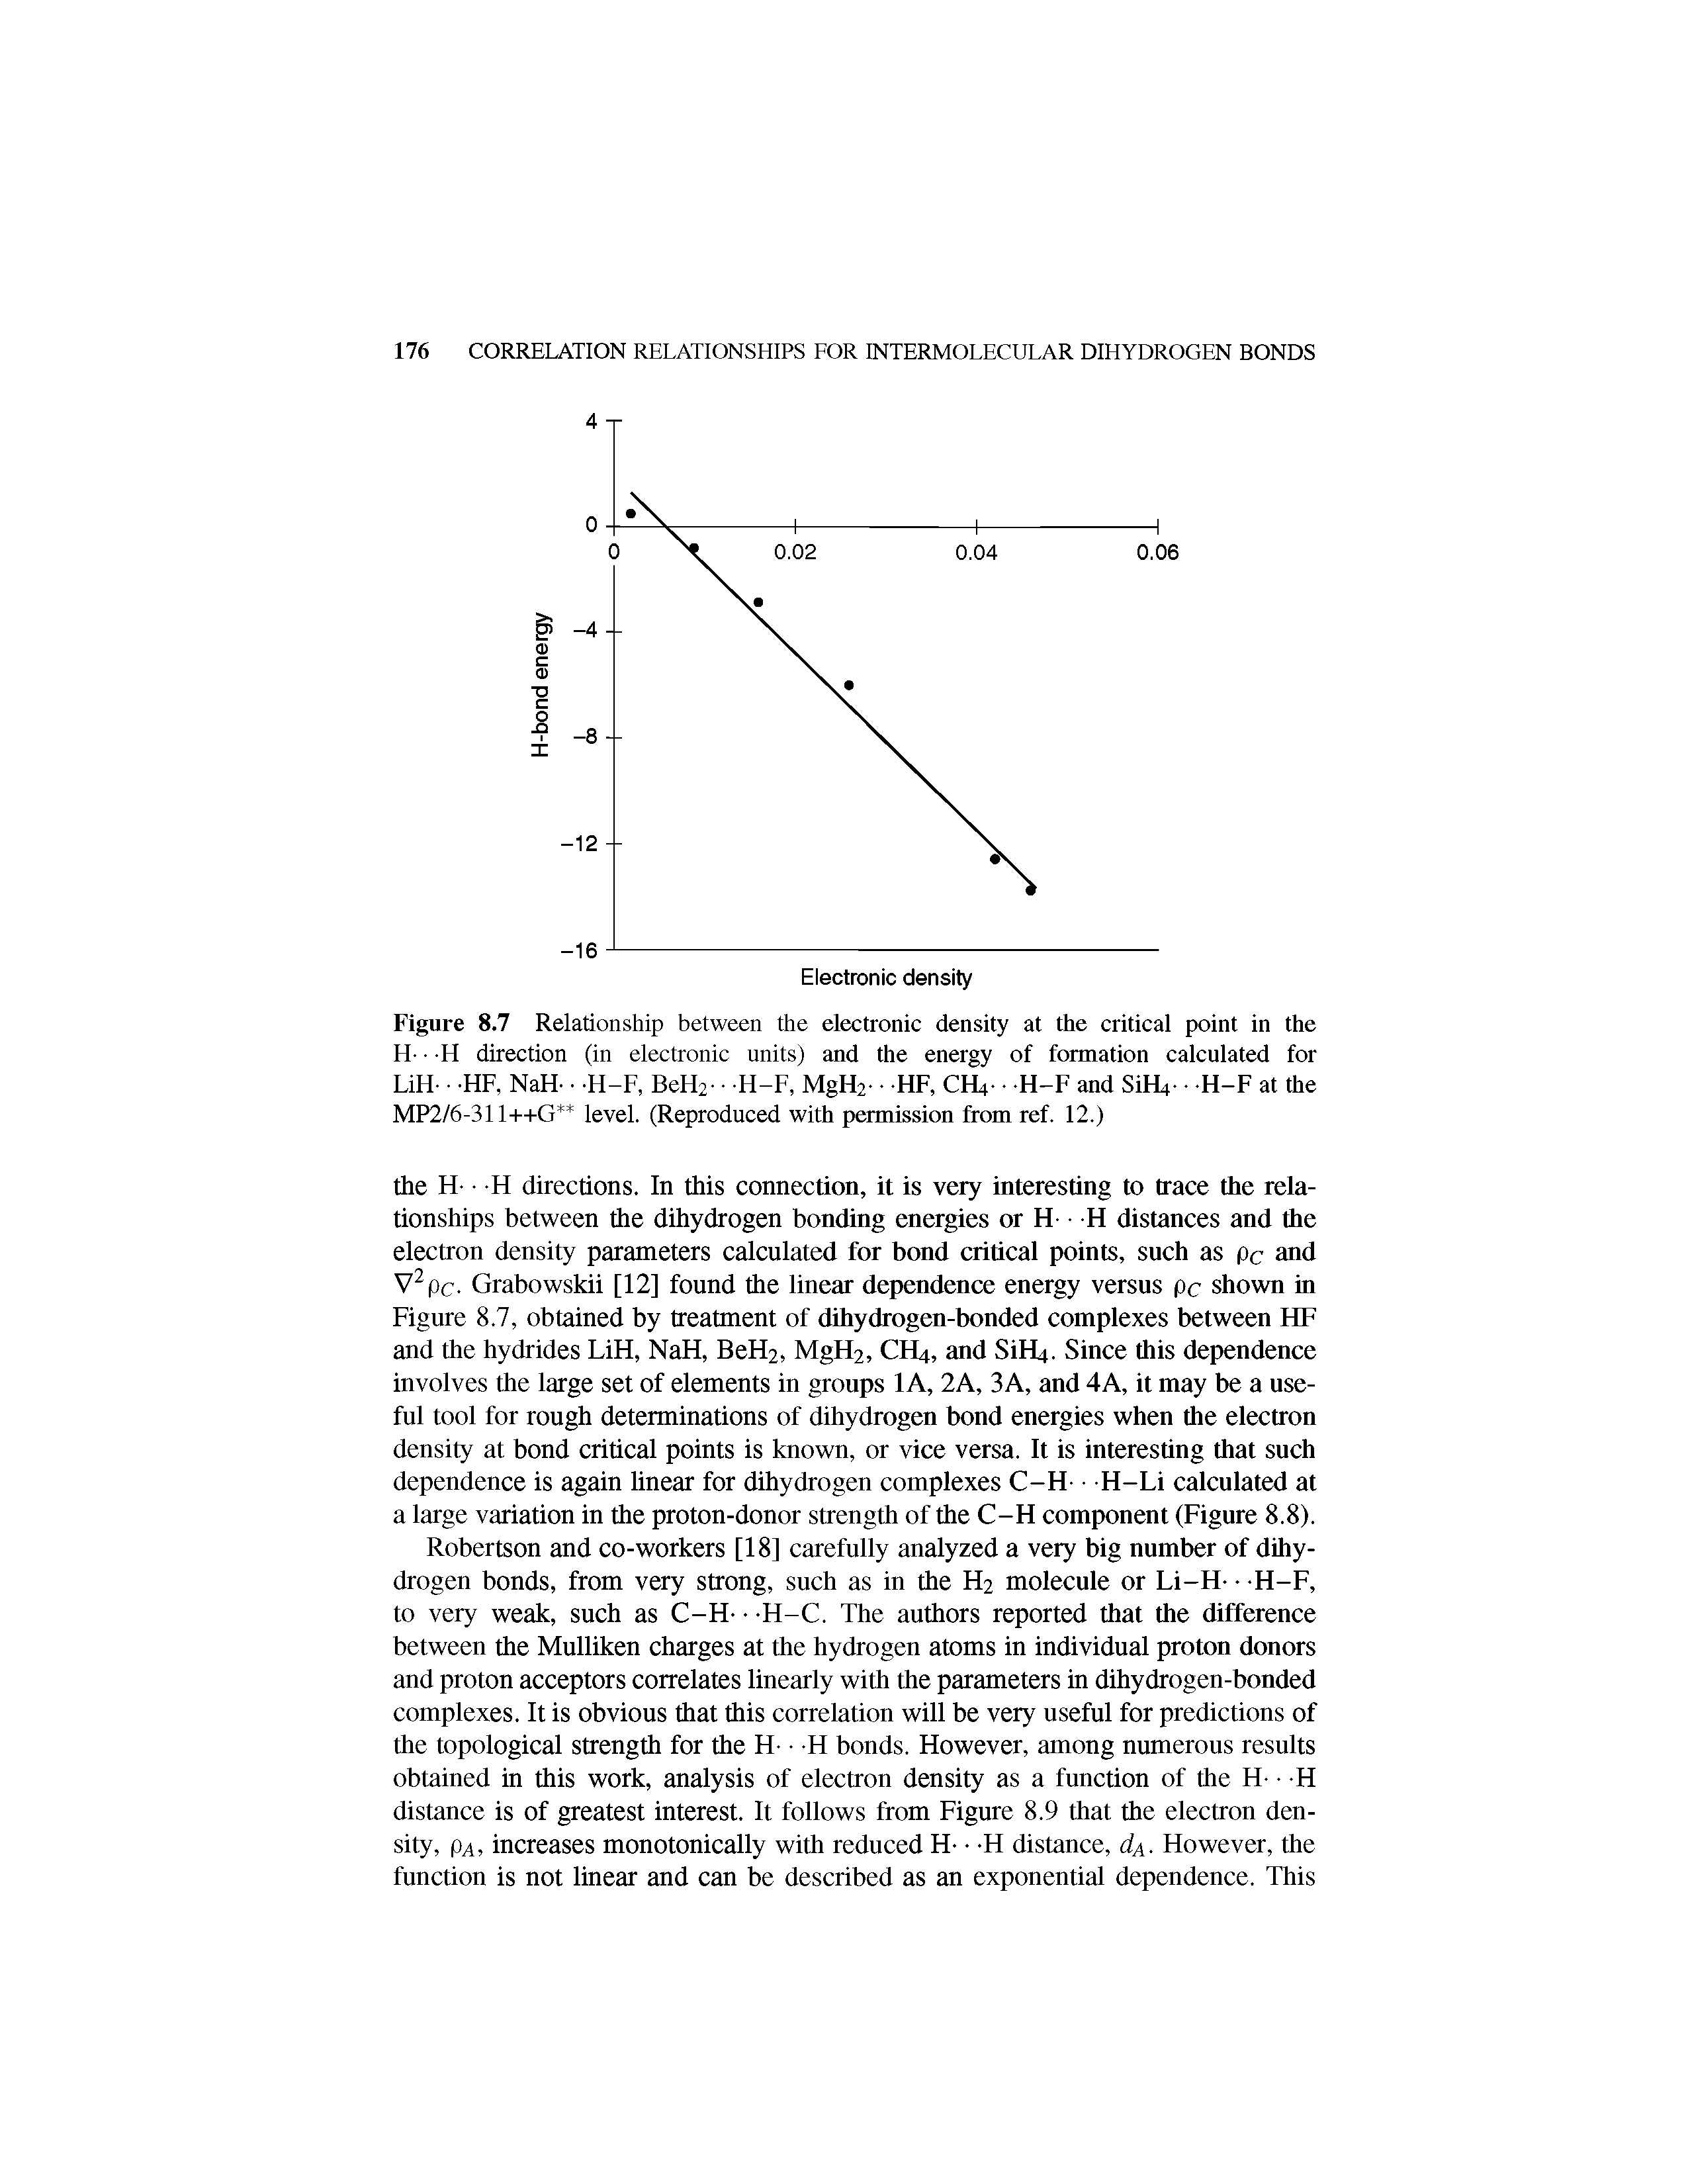 Figure 8.7 Relationship between the electronic density at the critical point in the H- H direction (in electronic units) and the energy of formation calculated for LiH- HF. NaH- H-F, BeH2- H-F, MgH2- HF, CIU- H-F and SiRt- H-F at the MP2/6-311++G level. (Reproduced with permission from ref. 12.)...